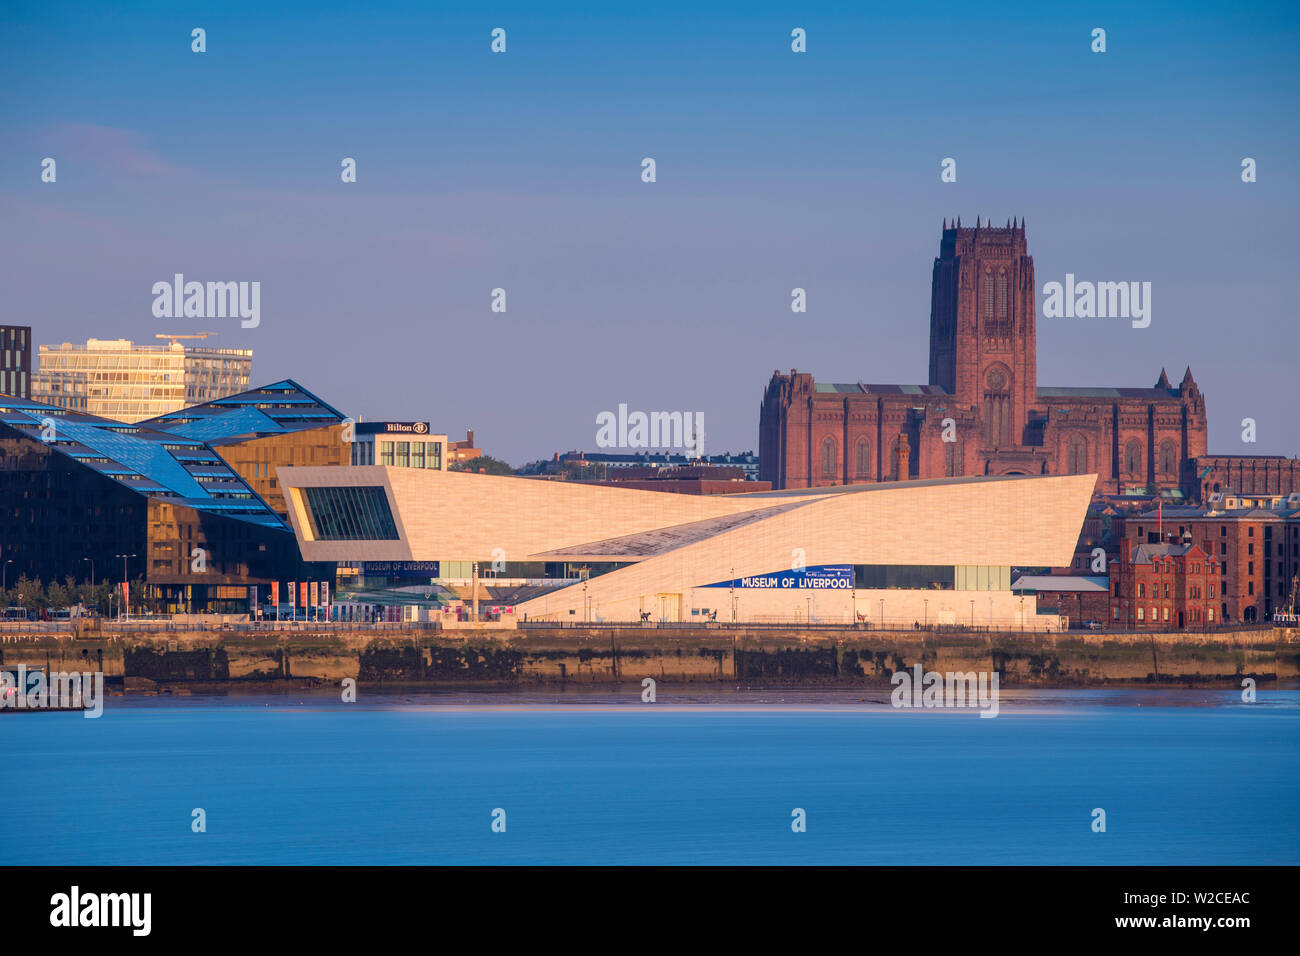 United Kingdom, England, Merseyside, Liverpool, View of The Museum of Liverpool and Liverpool Cathedral Stock Photo